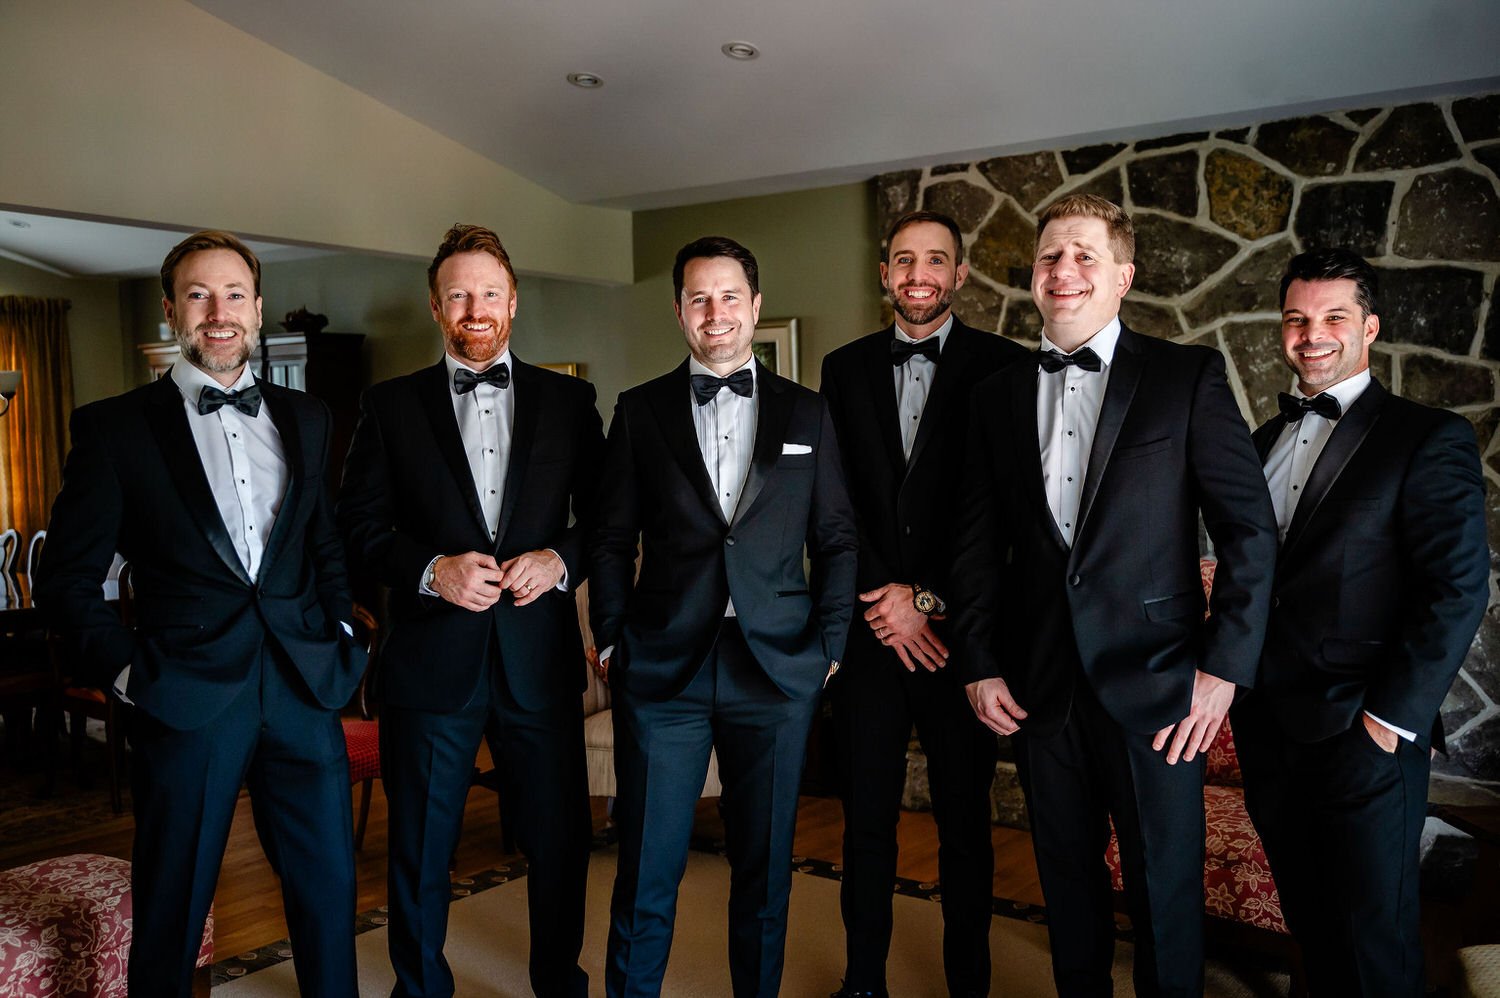 a photograph of groomsmen before a wedding ceremony